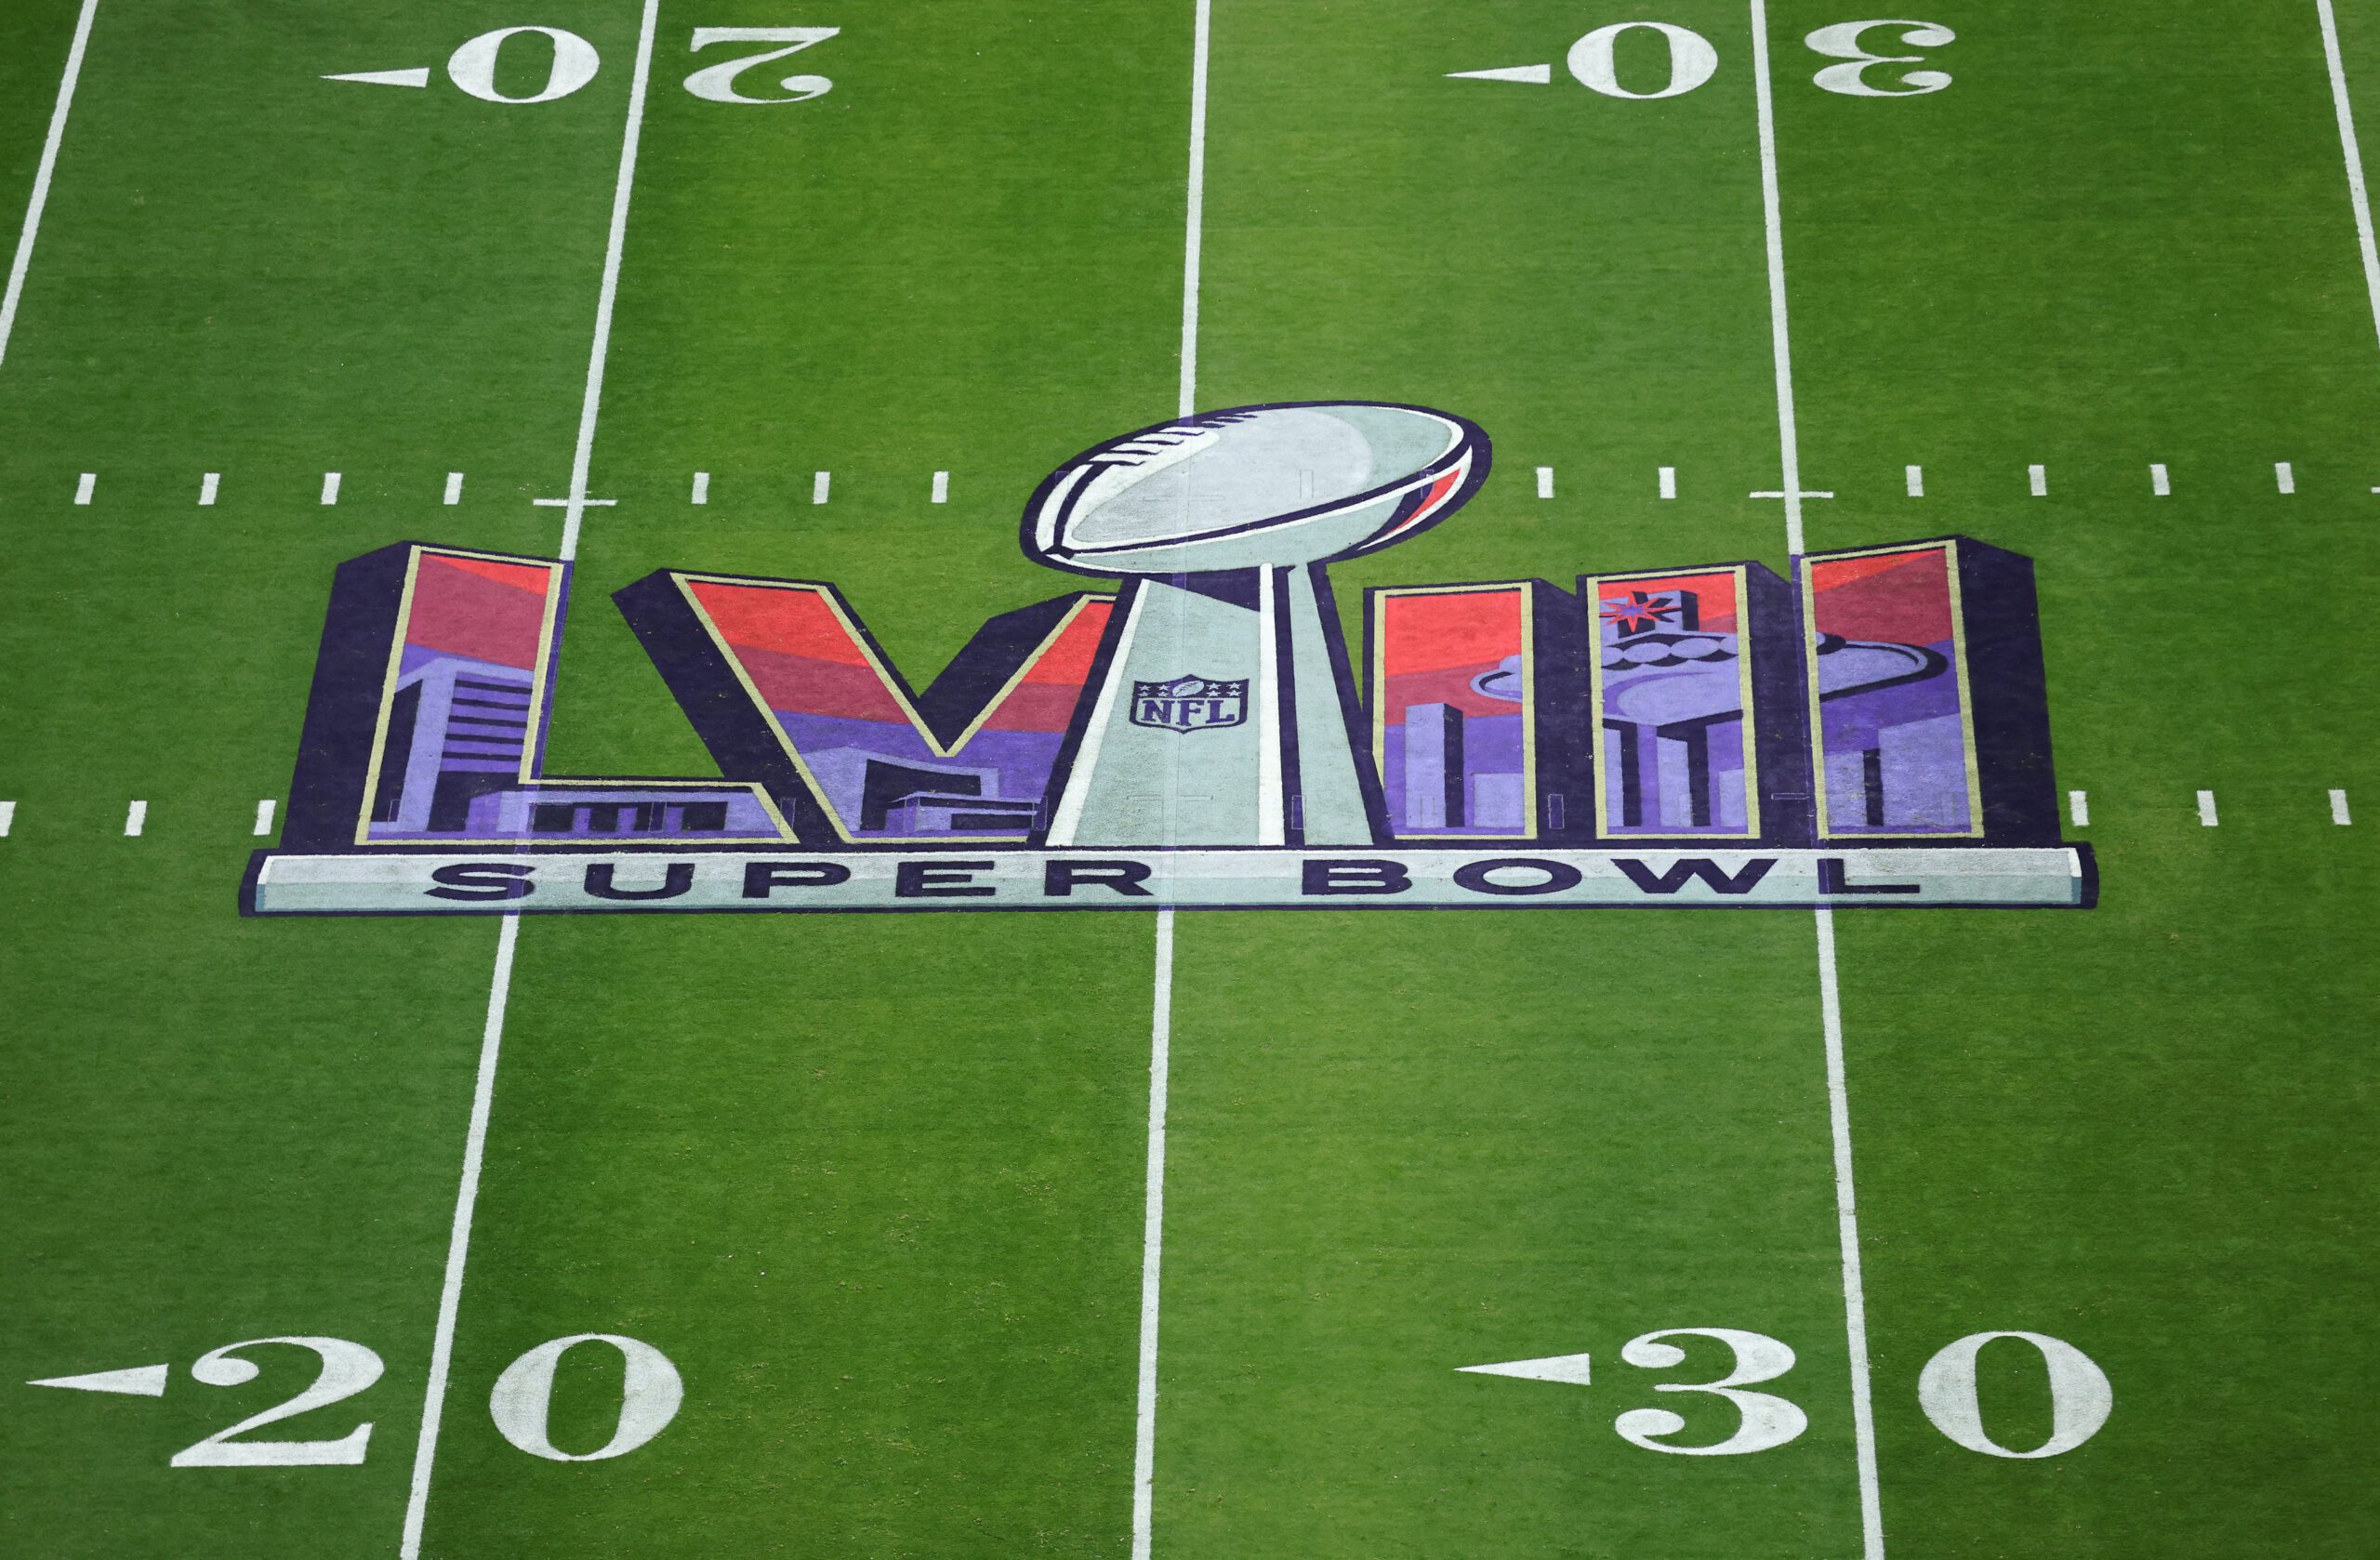 Super Bowl logo on the field.